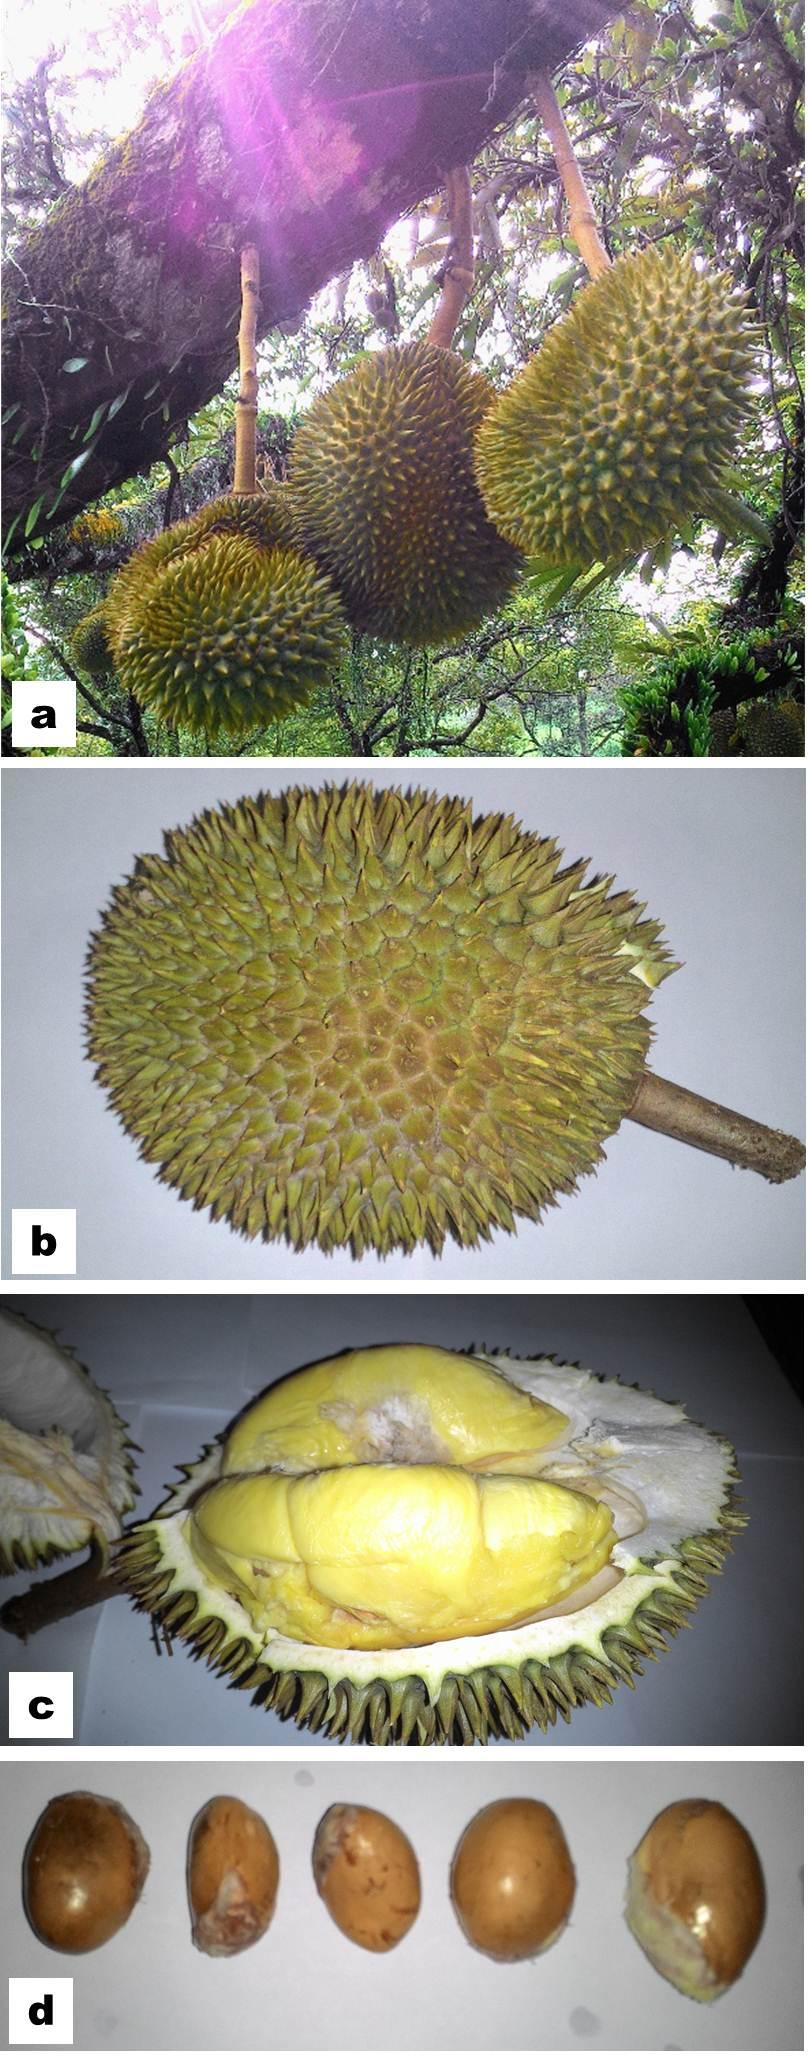 In general, durian fruits have a distinctive and robust aroma.